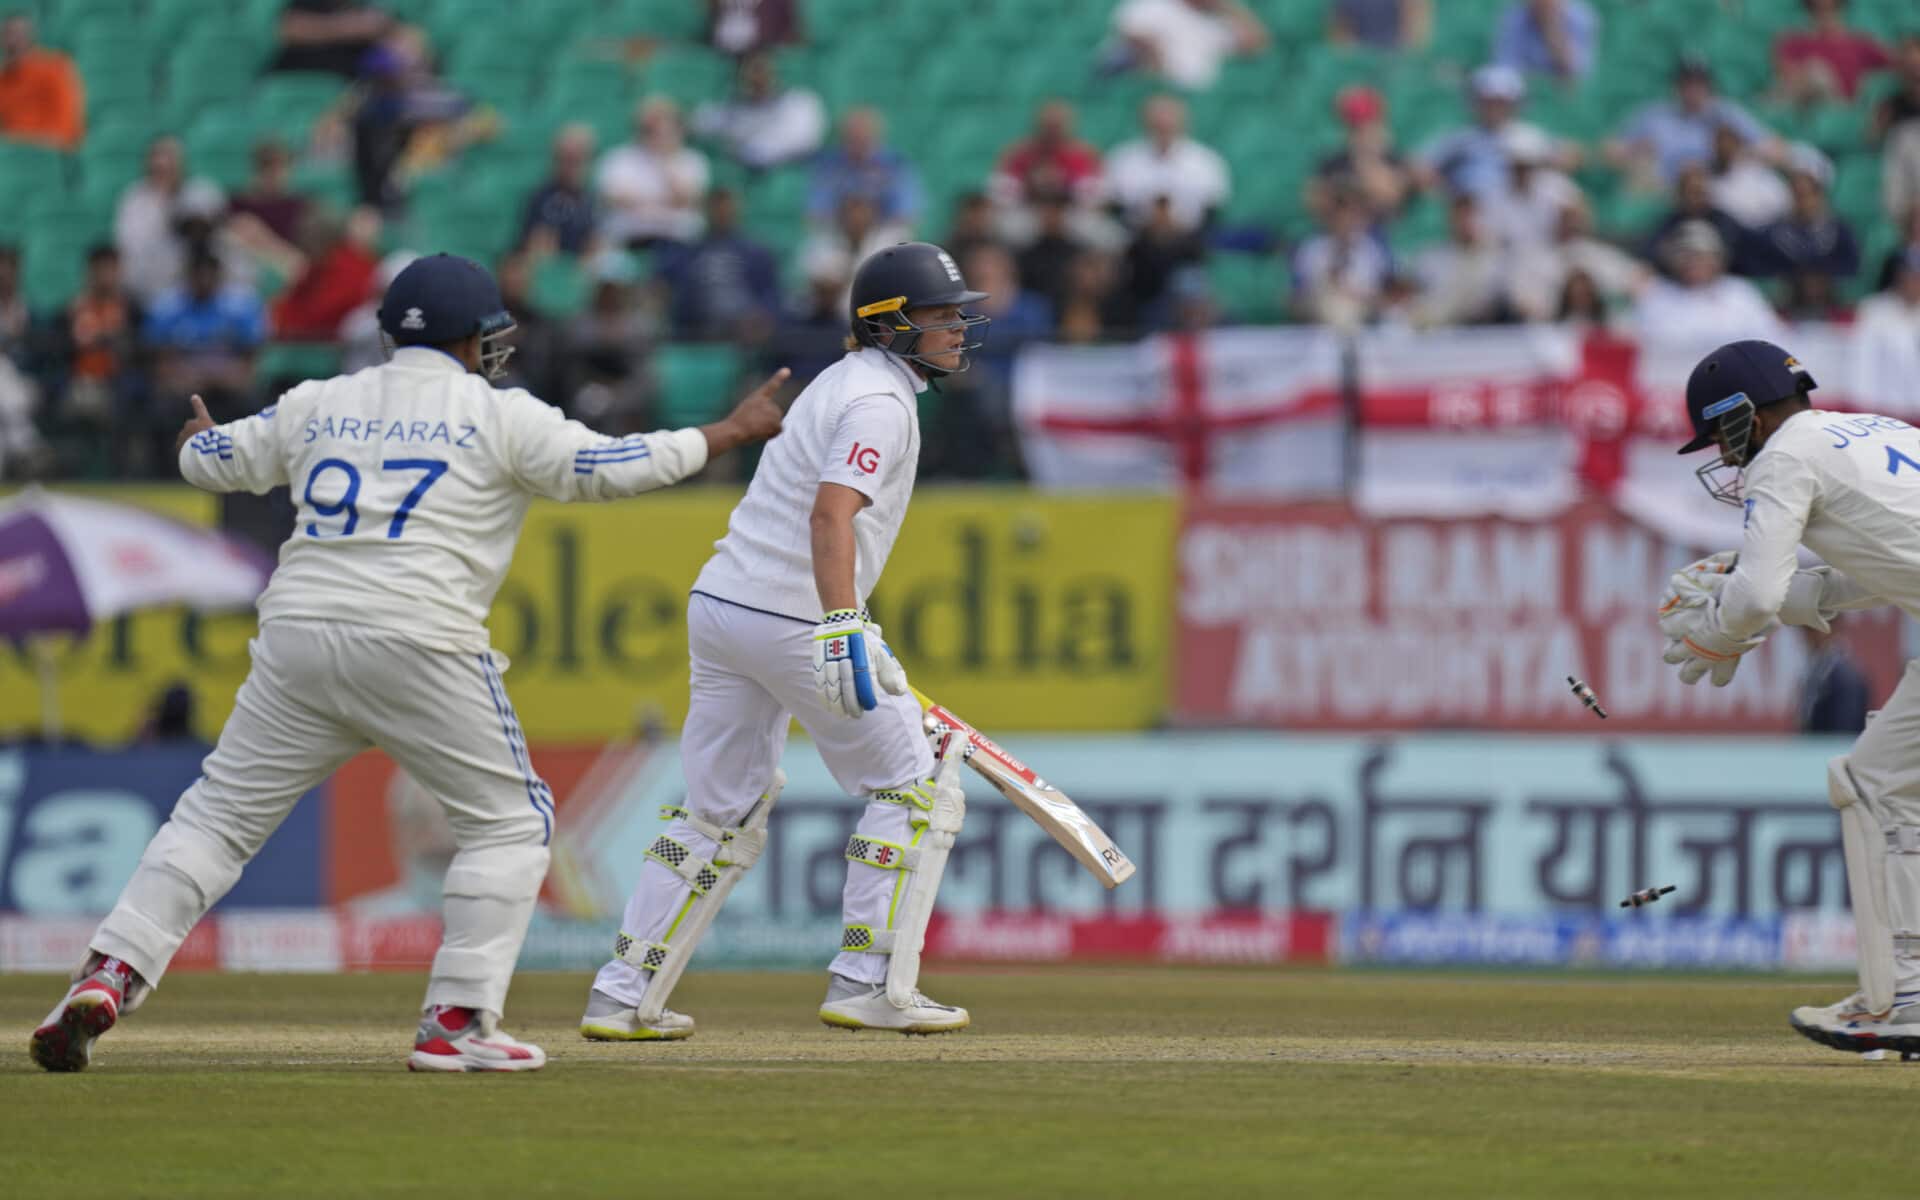 Ollie Pope lost his wicket just before lunch (Source: AP Photo)